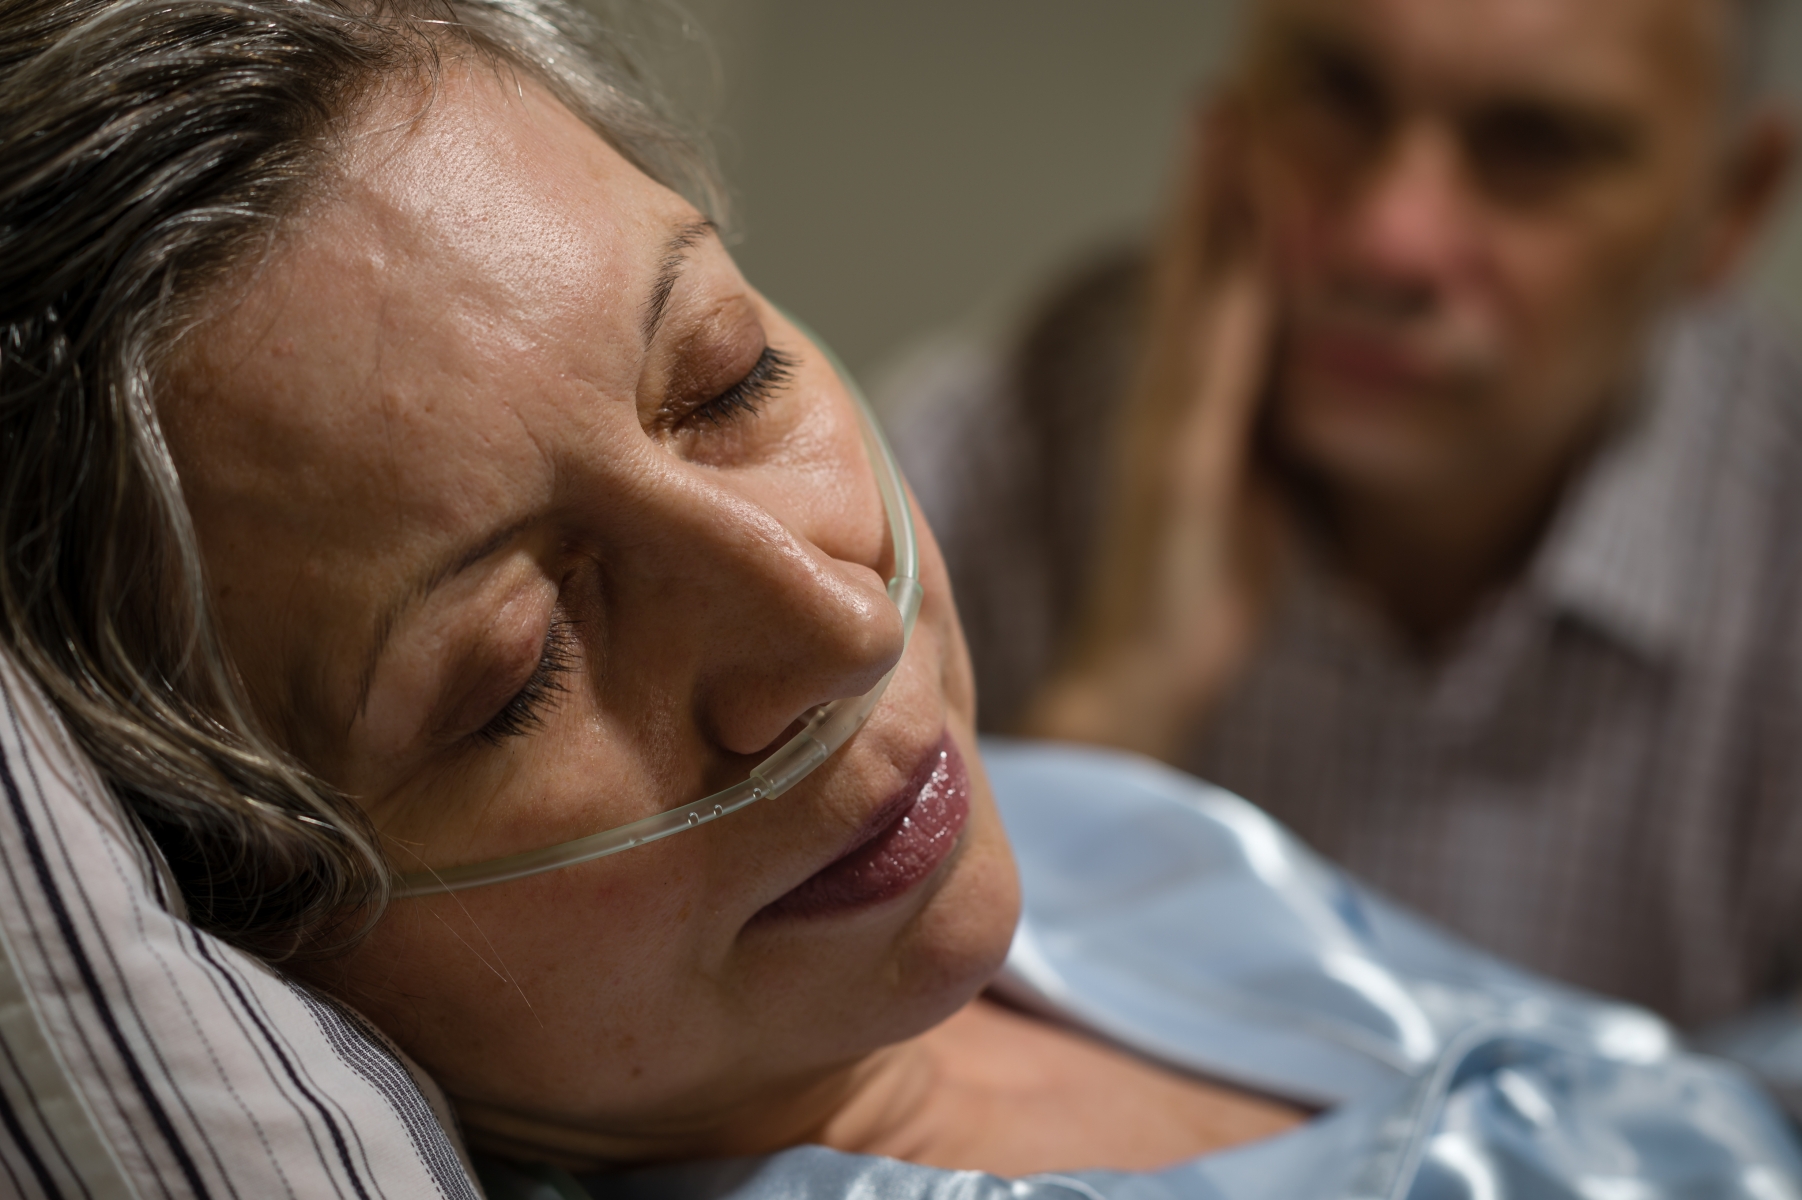 The Nasal Comforter helps  patients who are on oxygen